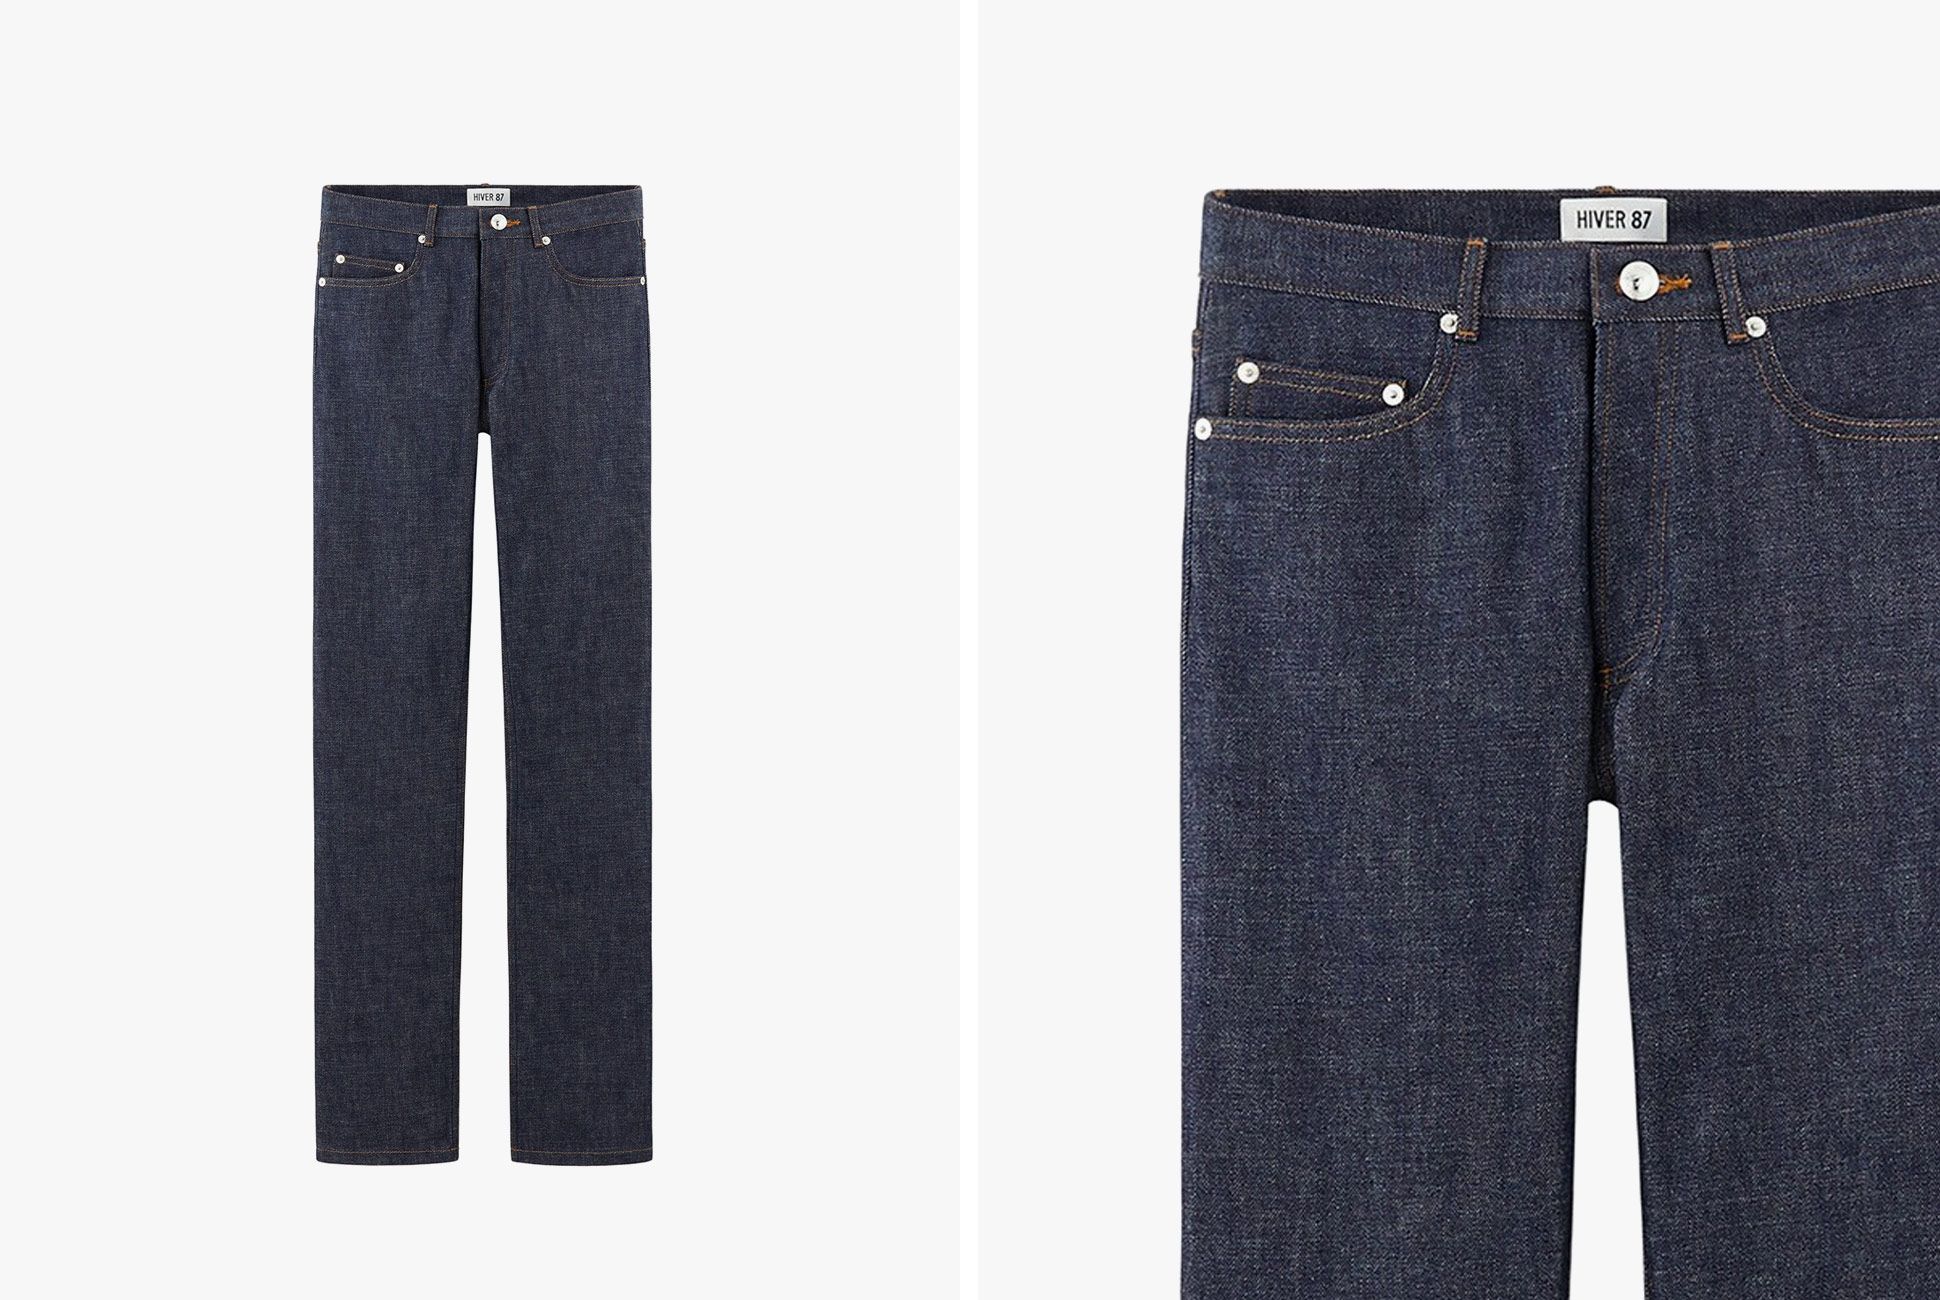 A.P.C. Launches the Standard, a Tribute to Its First Jeans - Gear